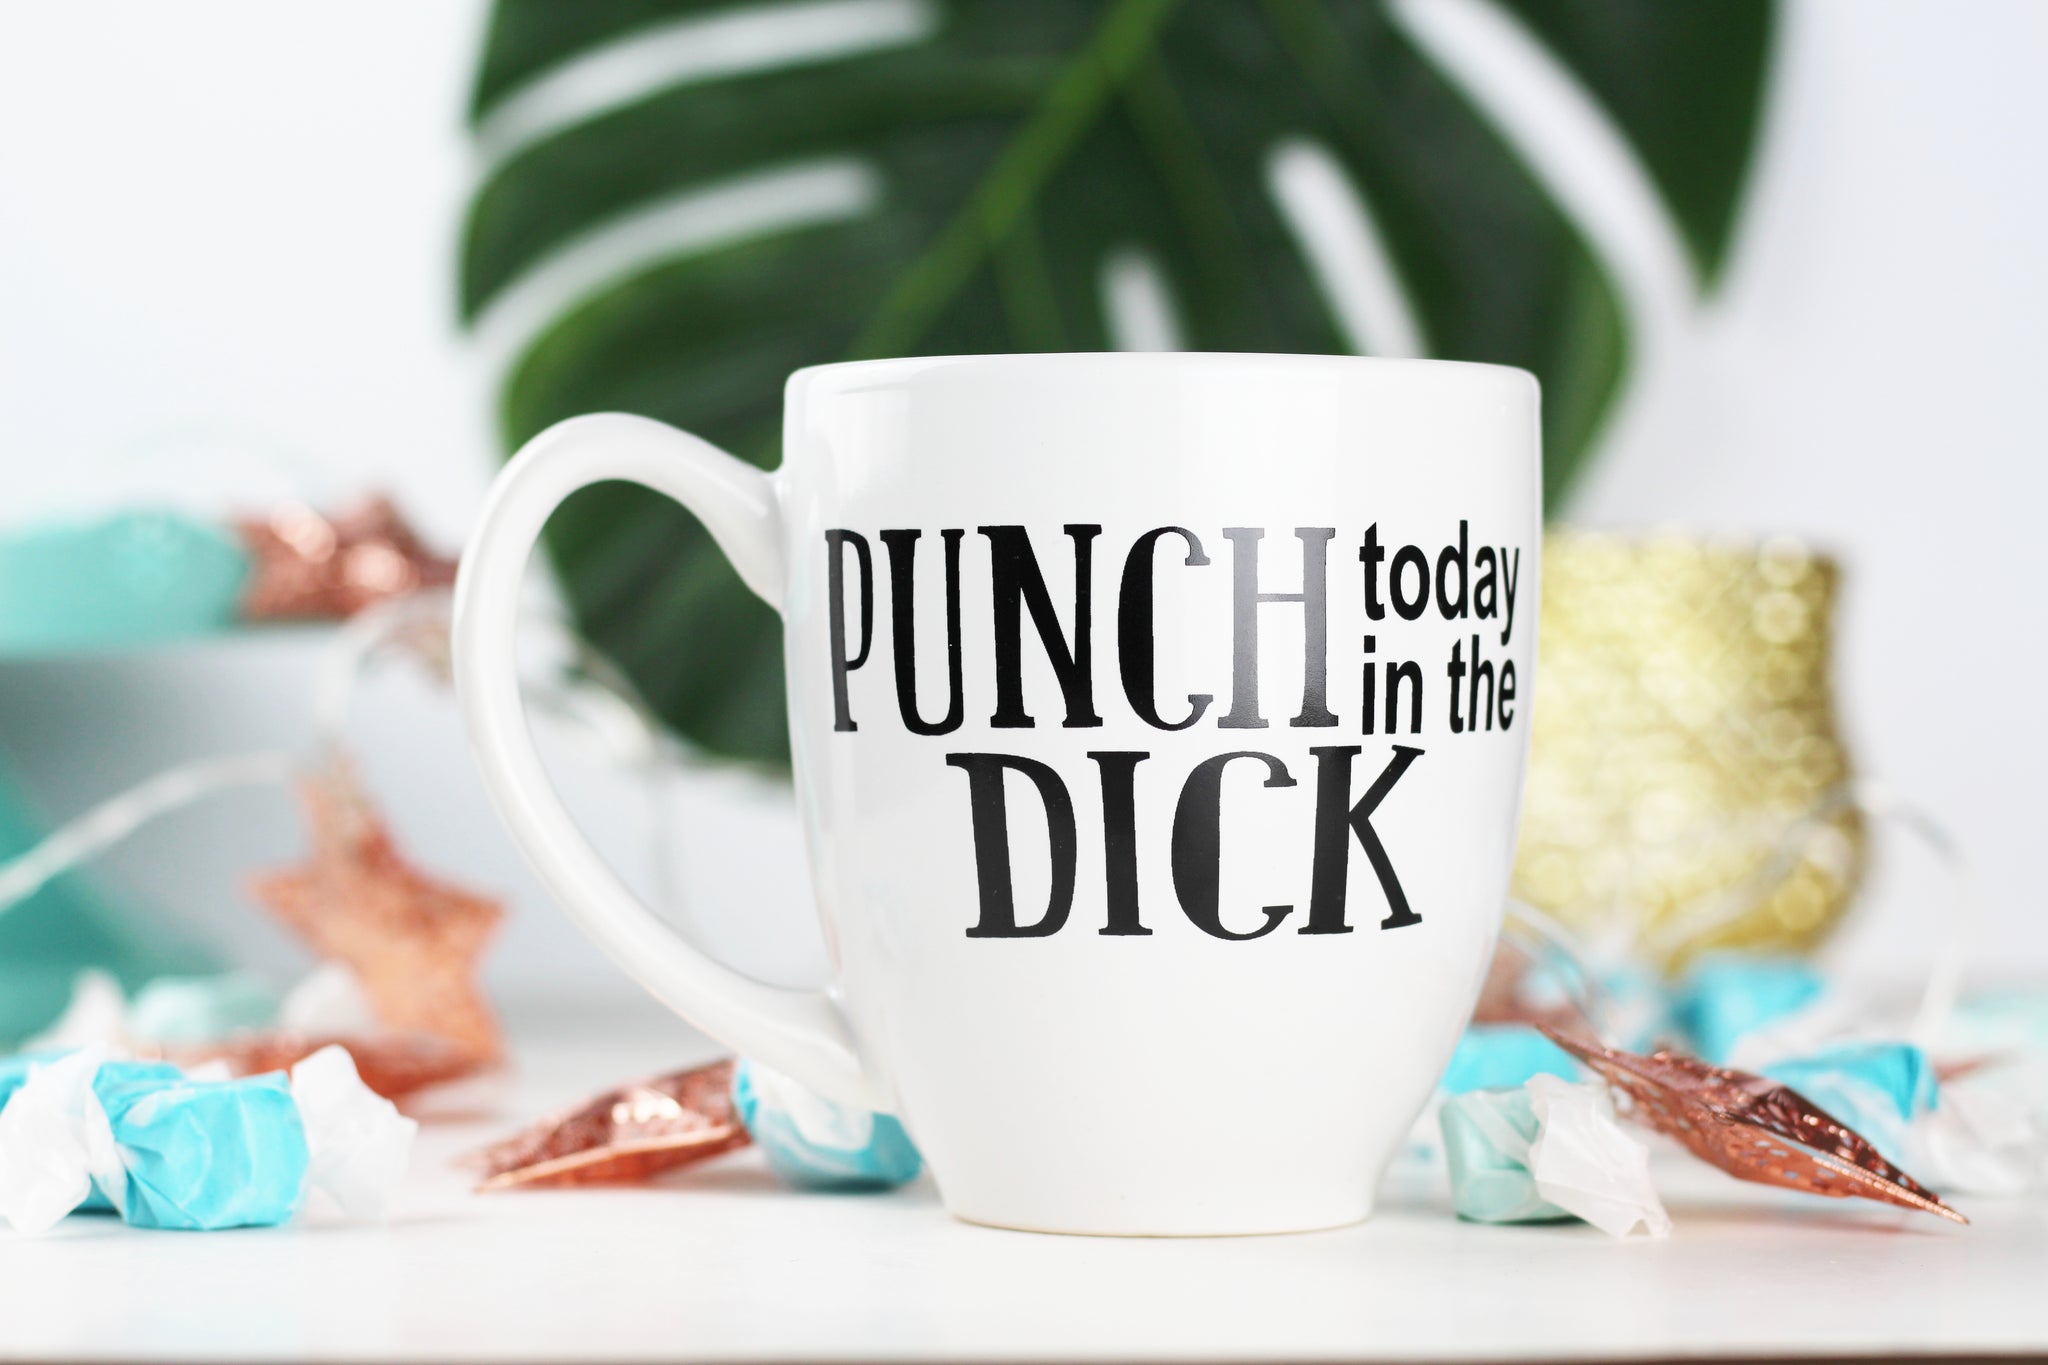 Punch today in the dick